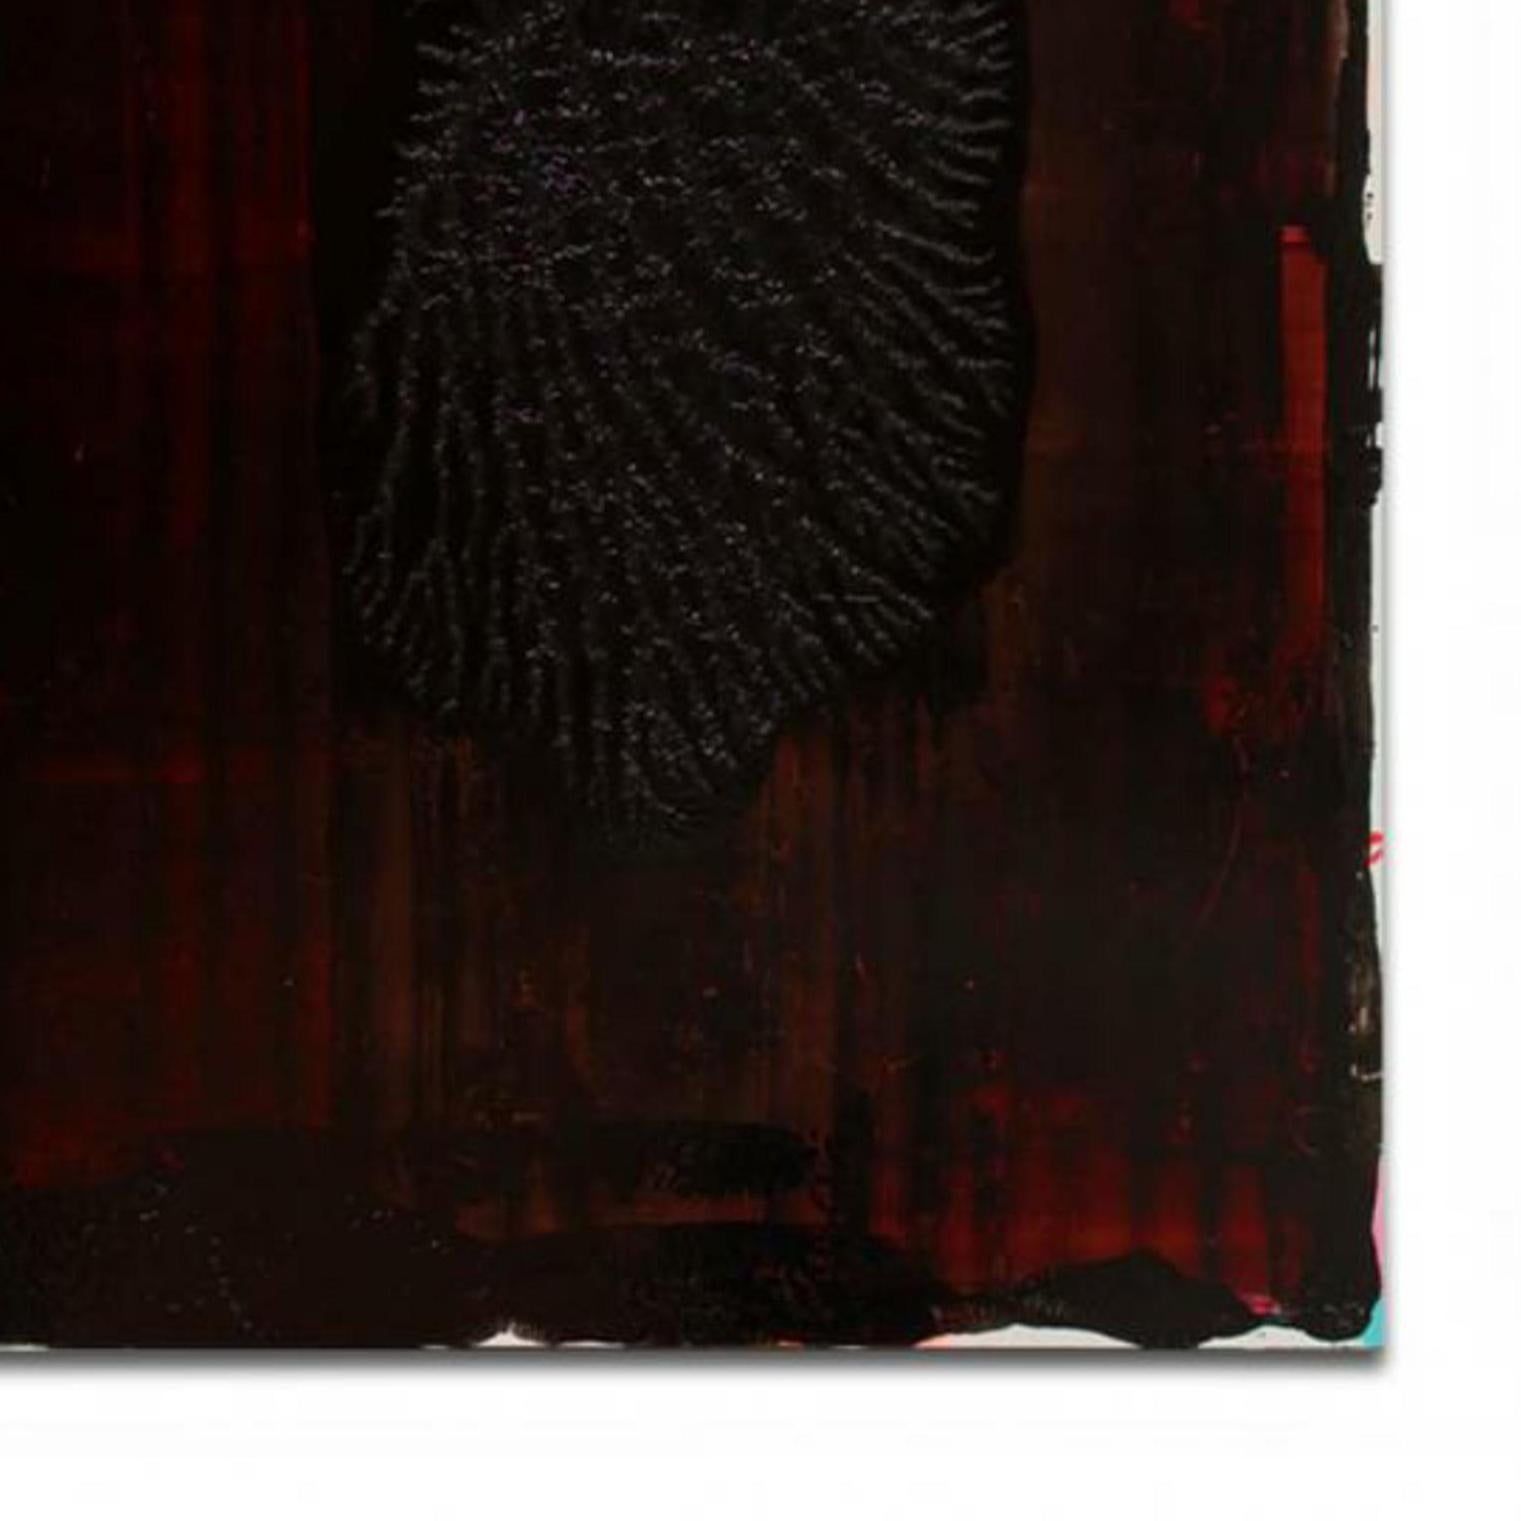 2374 Darwins Coral by artist Bernd Haussmann is a deep red contemporary abstract mixed media on aluminum that measures 51.25 by 48.

Bernd Haussmann’s artwork explores gesture, color, and texture in paintings on metal, acrylic, glass, wood, canvas